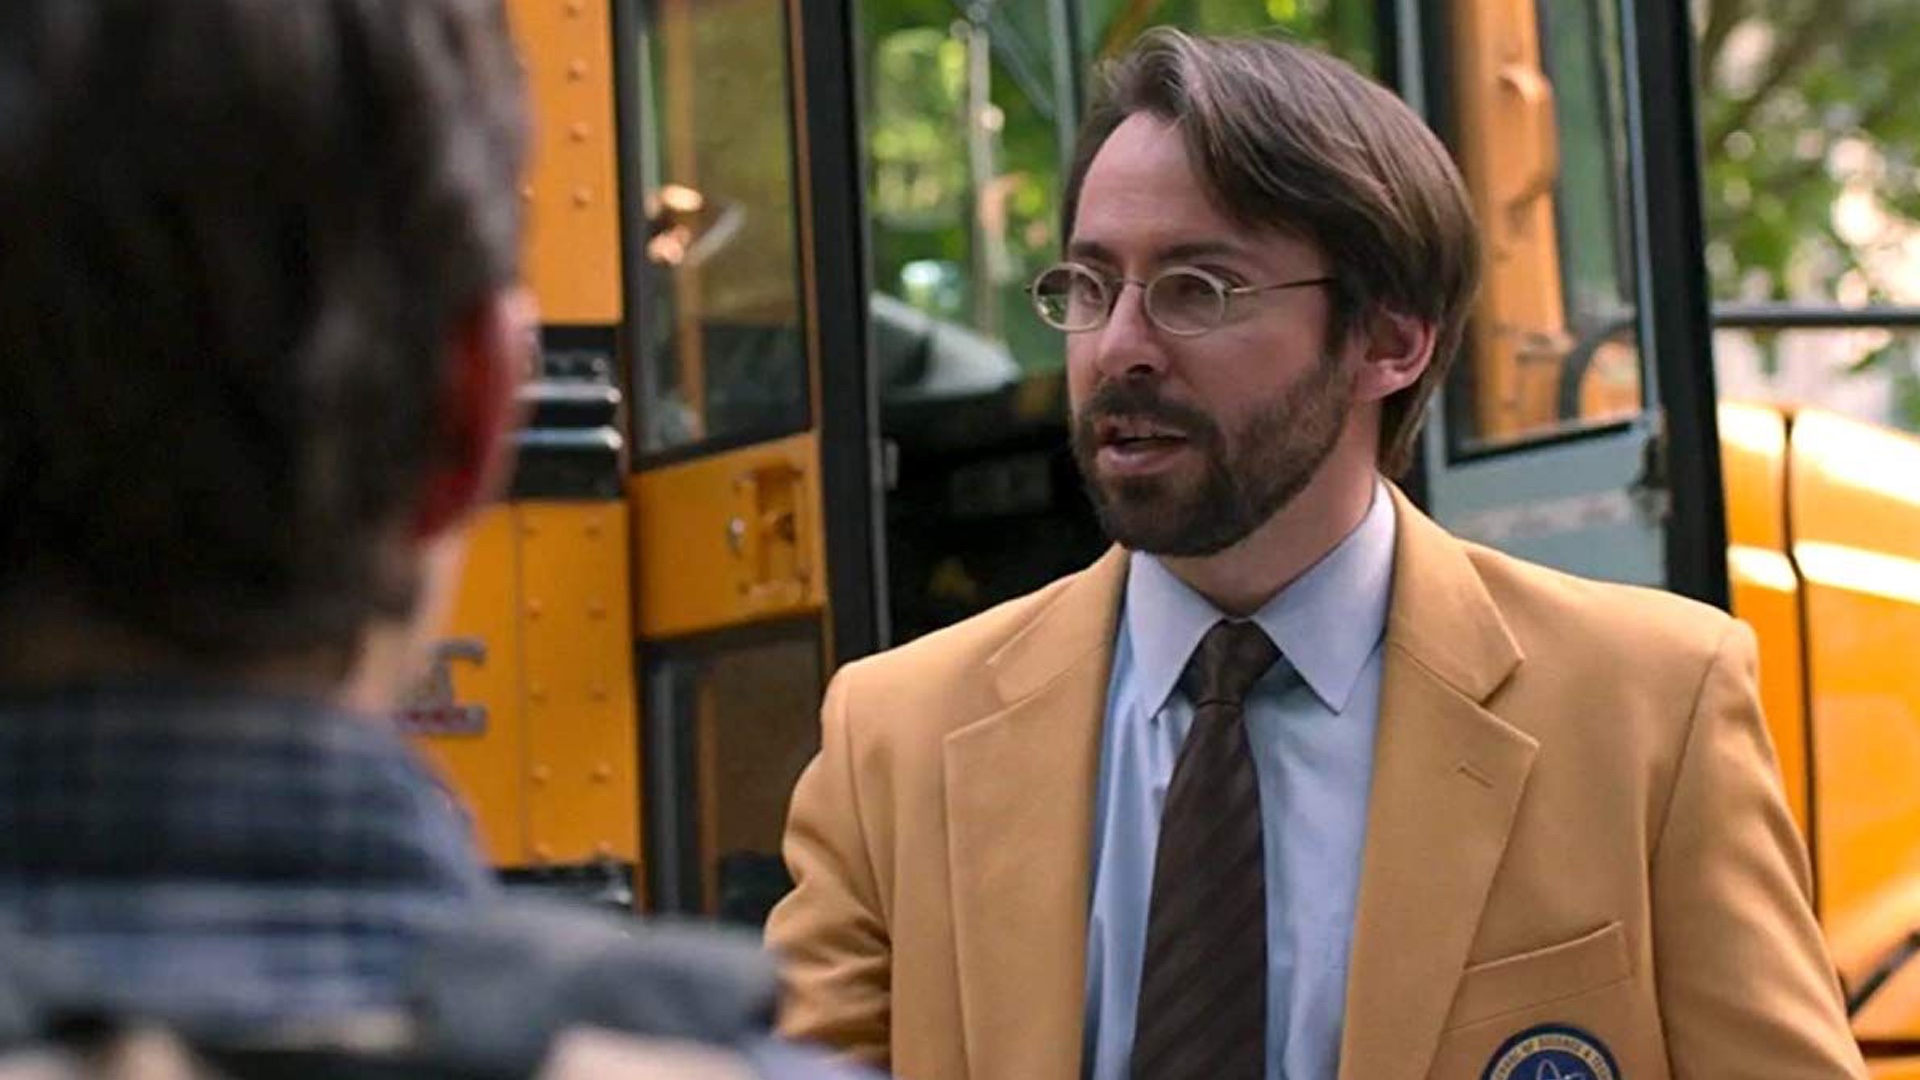 Spider-Man: Far From Home Interview: Martin Starr On Mr. Harrington, His Sad Shell Of An Existence, And Silicon Valley!